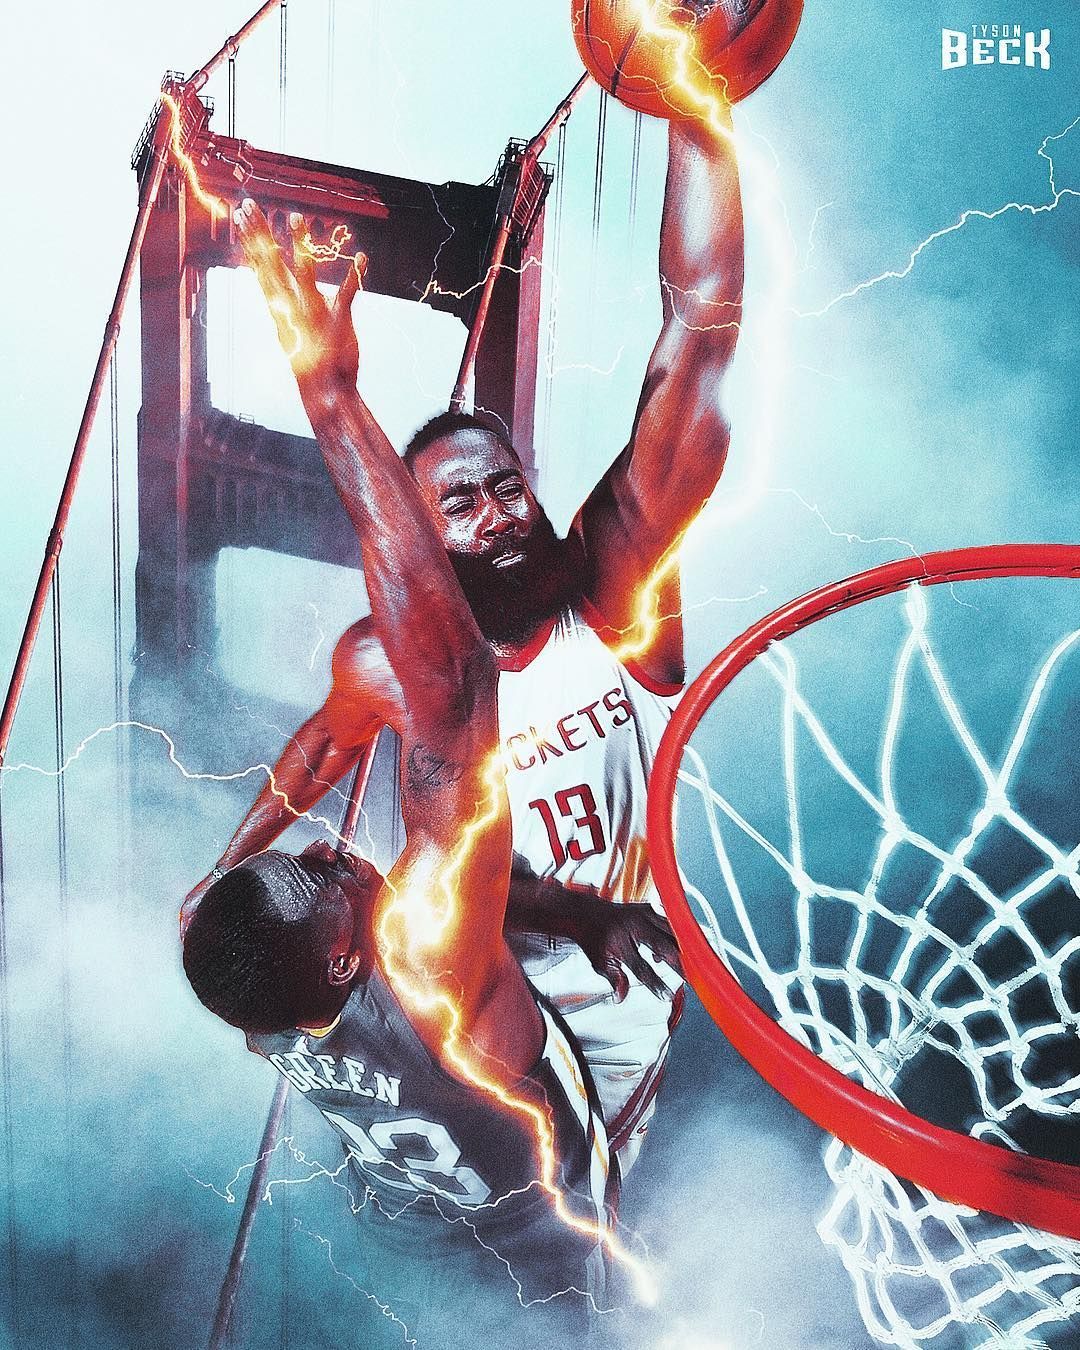 James Harden just put Draymond Green on a poster straight from the court to your IG Feed #NBAPlayoffs #Realtim. James harden, Draymond green, Nba basketball art